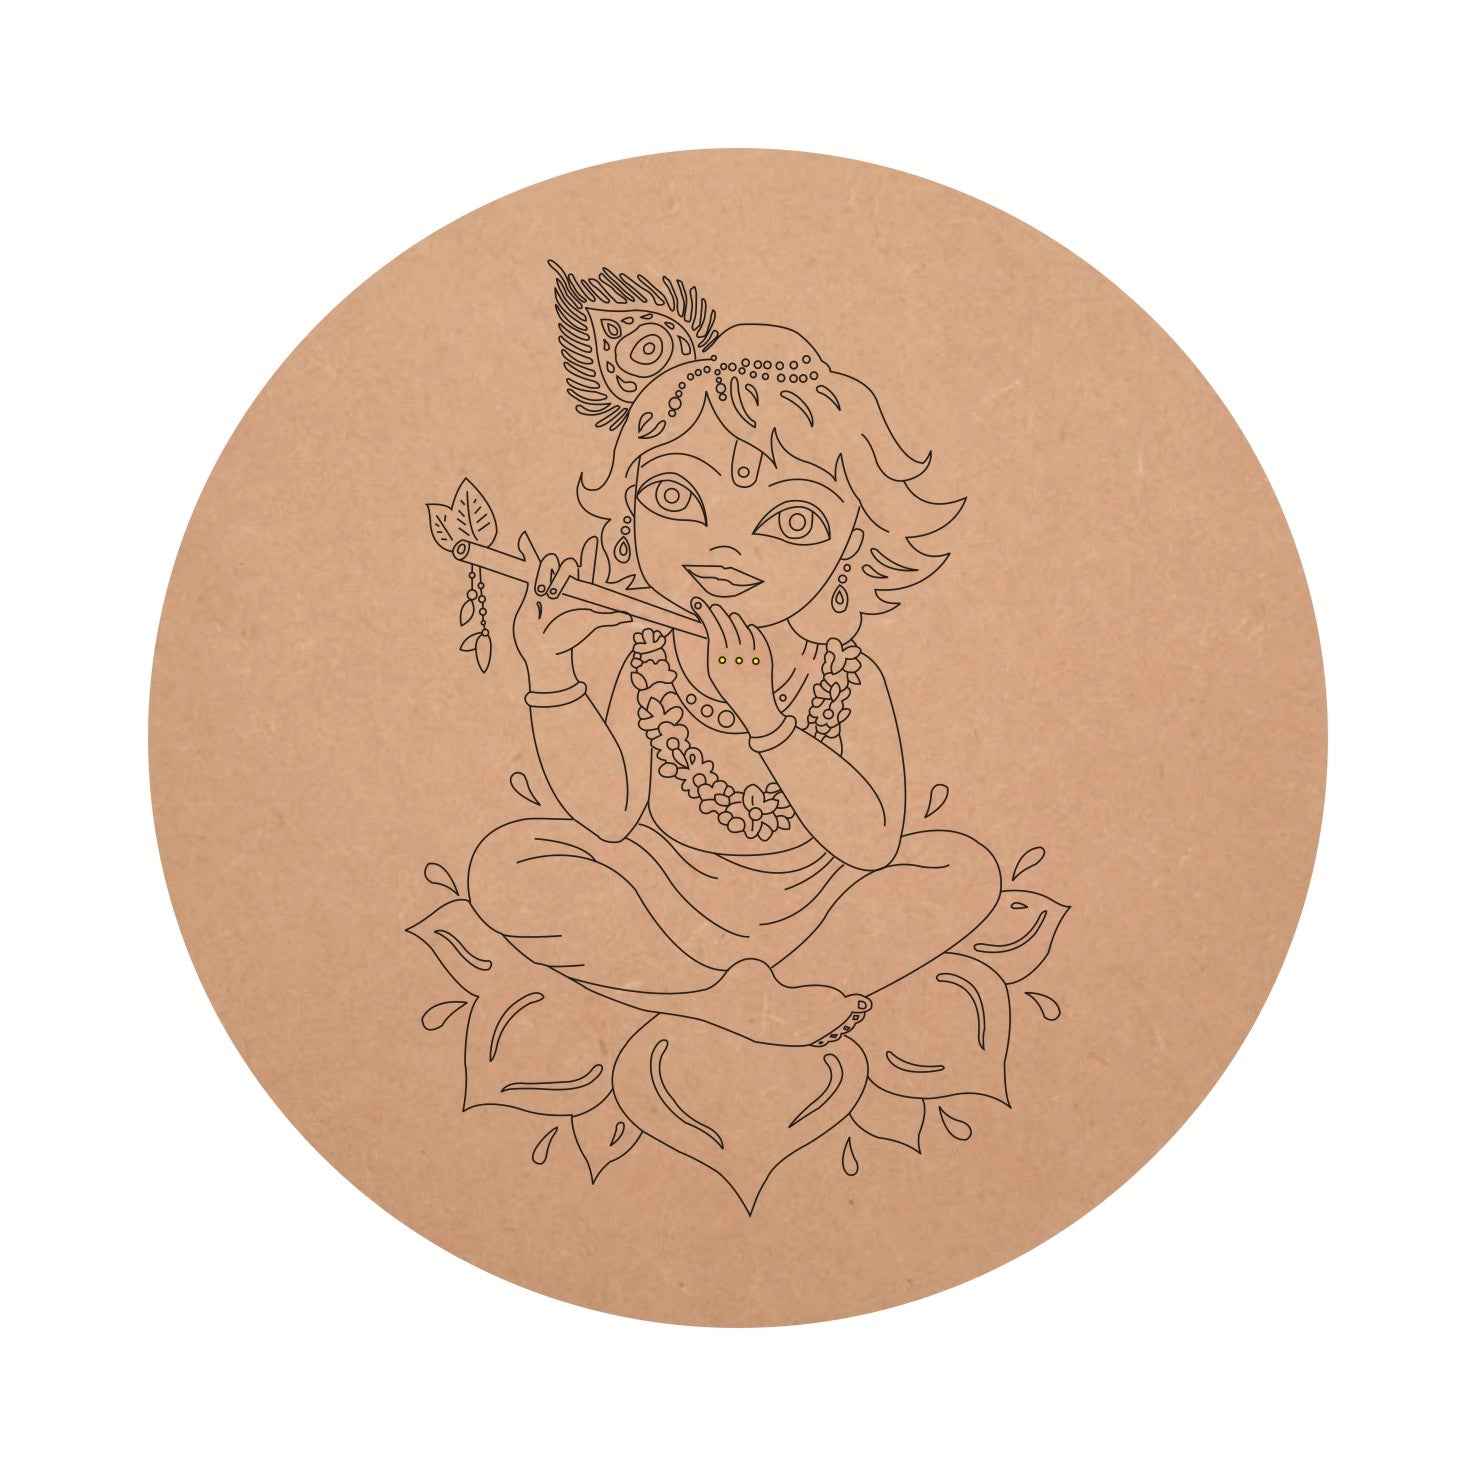 MDF Pre Marked Little Krishna Playing the Flute Round Base